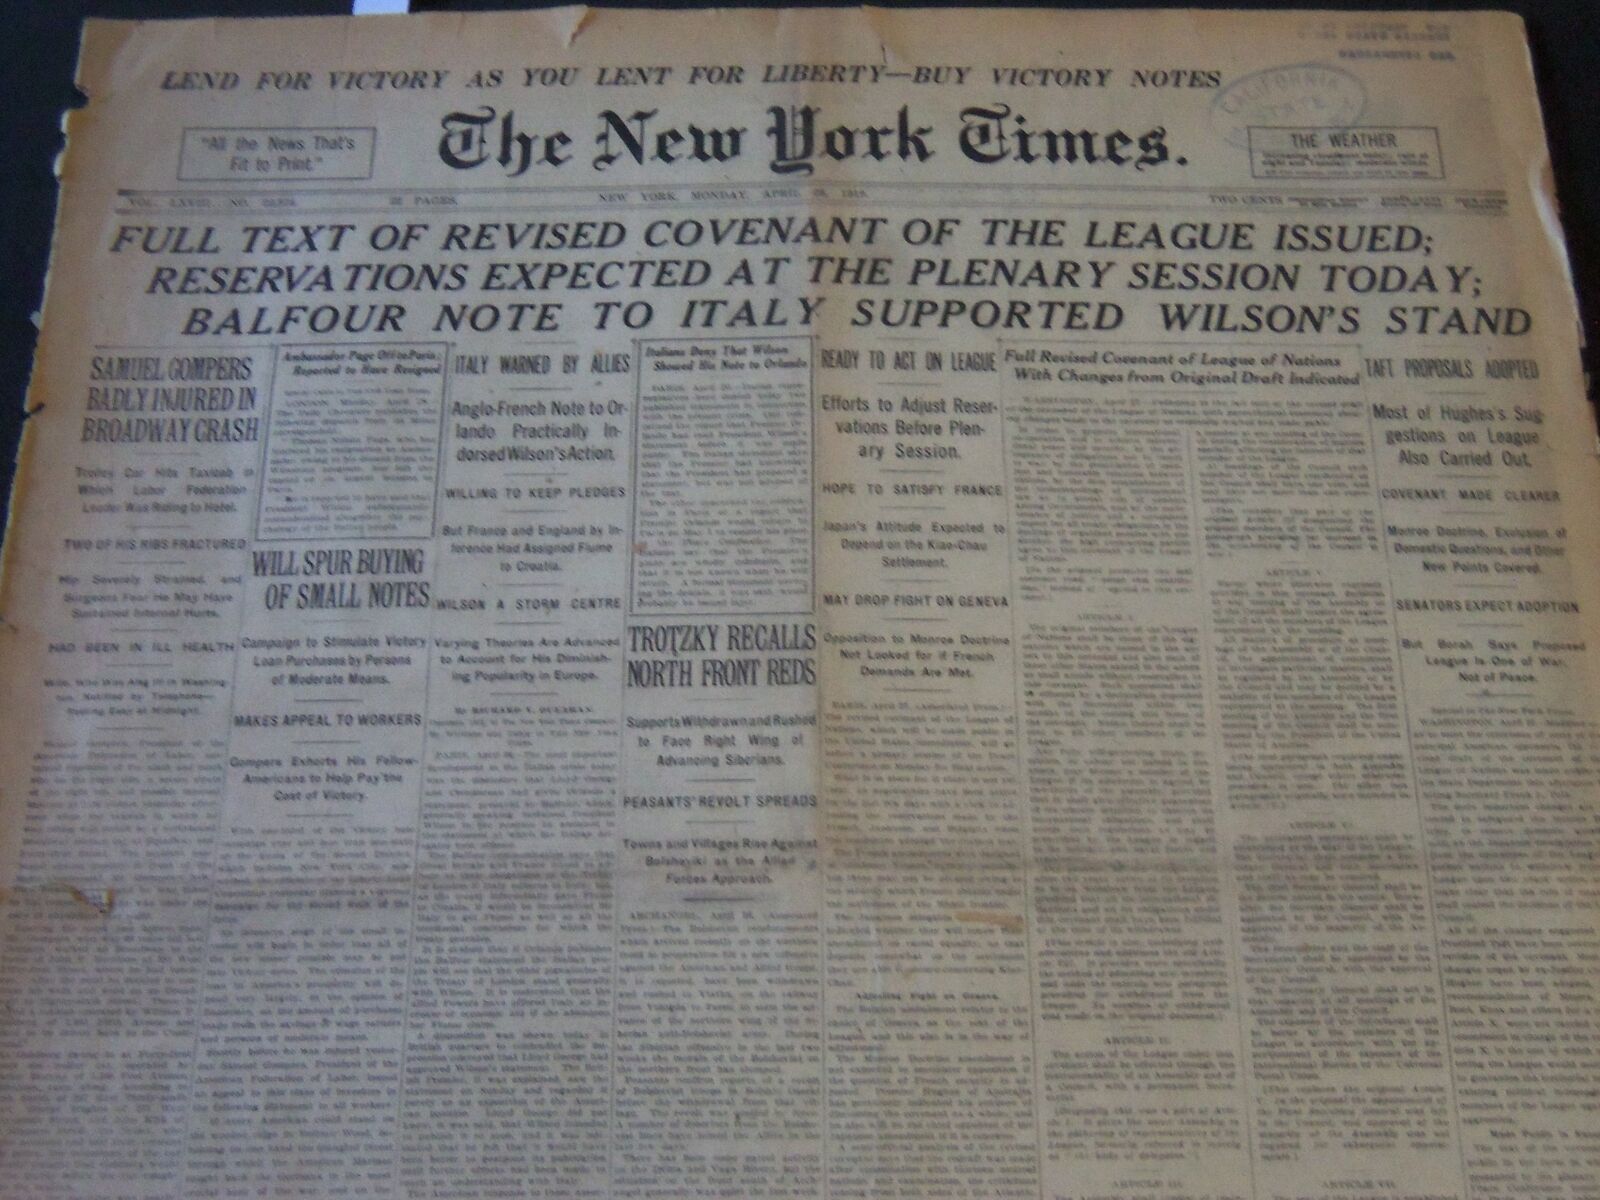 1919 APRIL 28 NEW YORK TIMES - FULL TEXT OF REVISED COVENANT OF LEAGUE - NT 6313